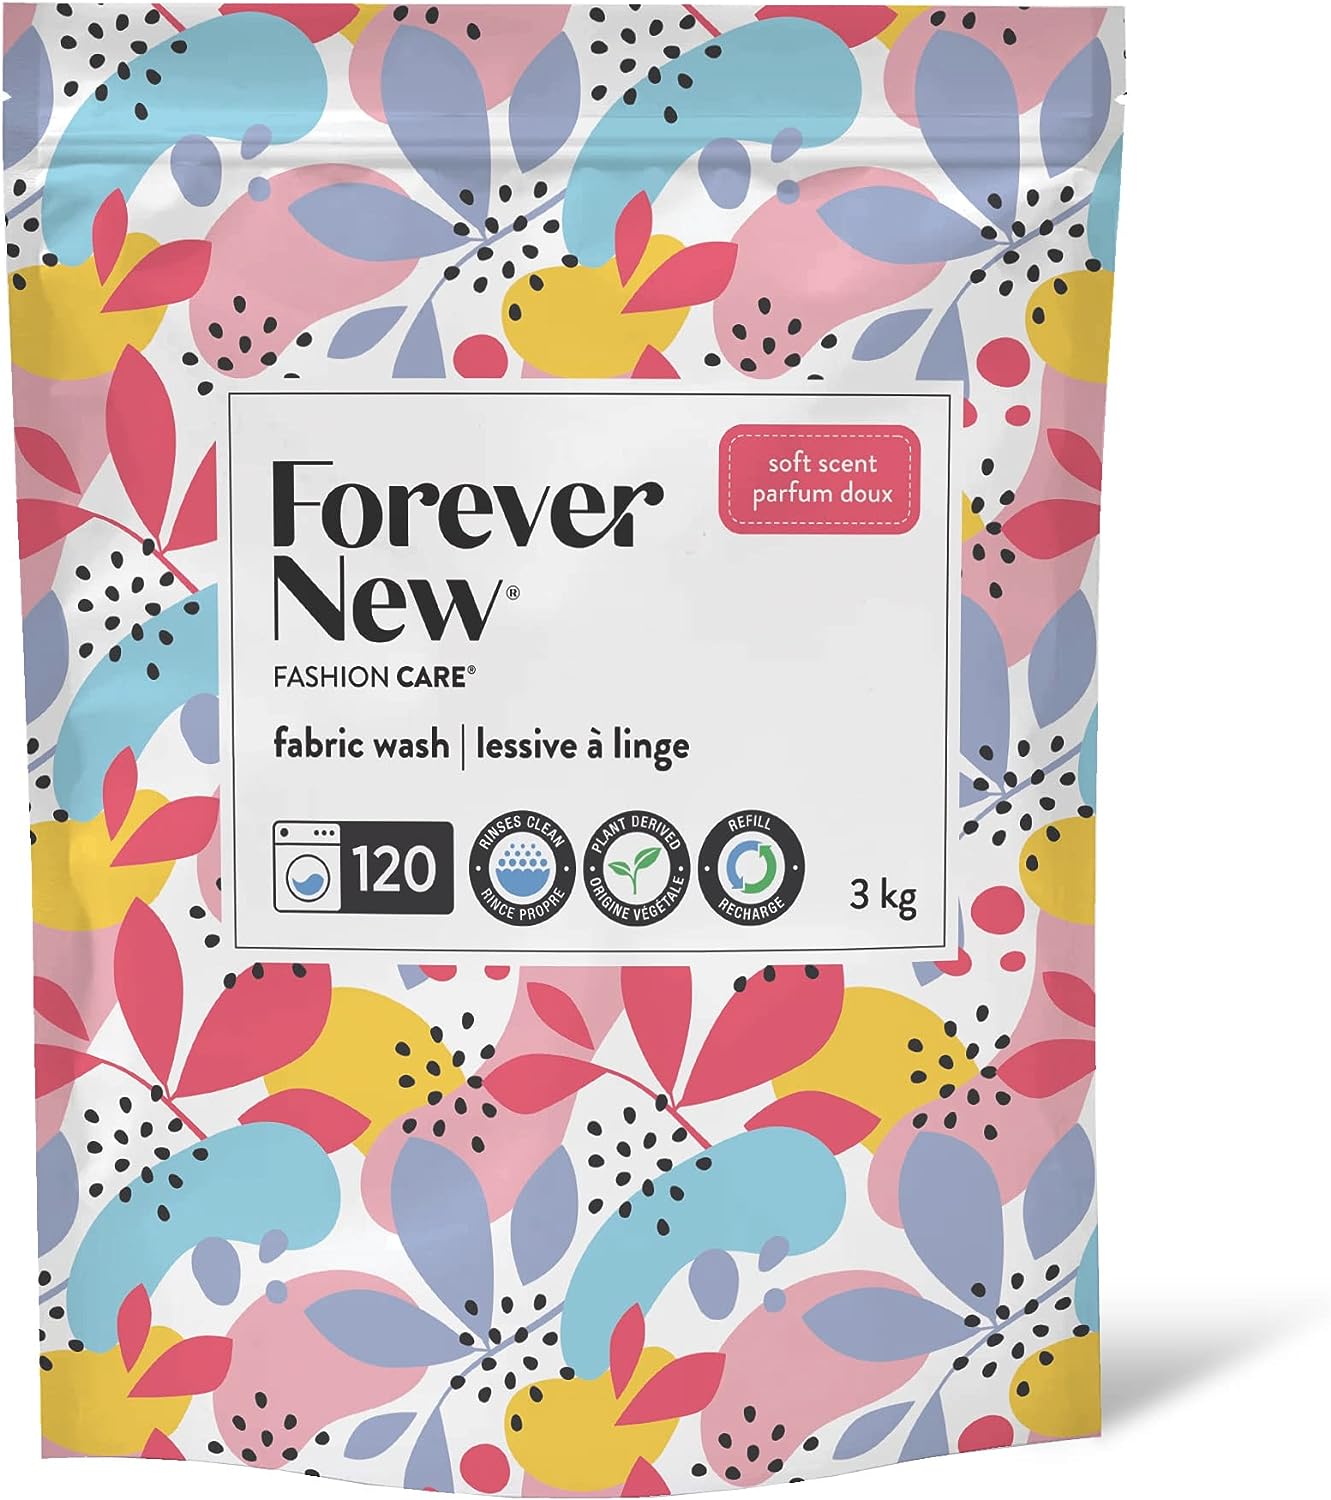 Forever New 3kg Powder Pouch Fabric Wash - Soft Scented front view